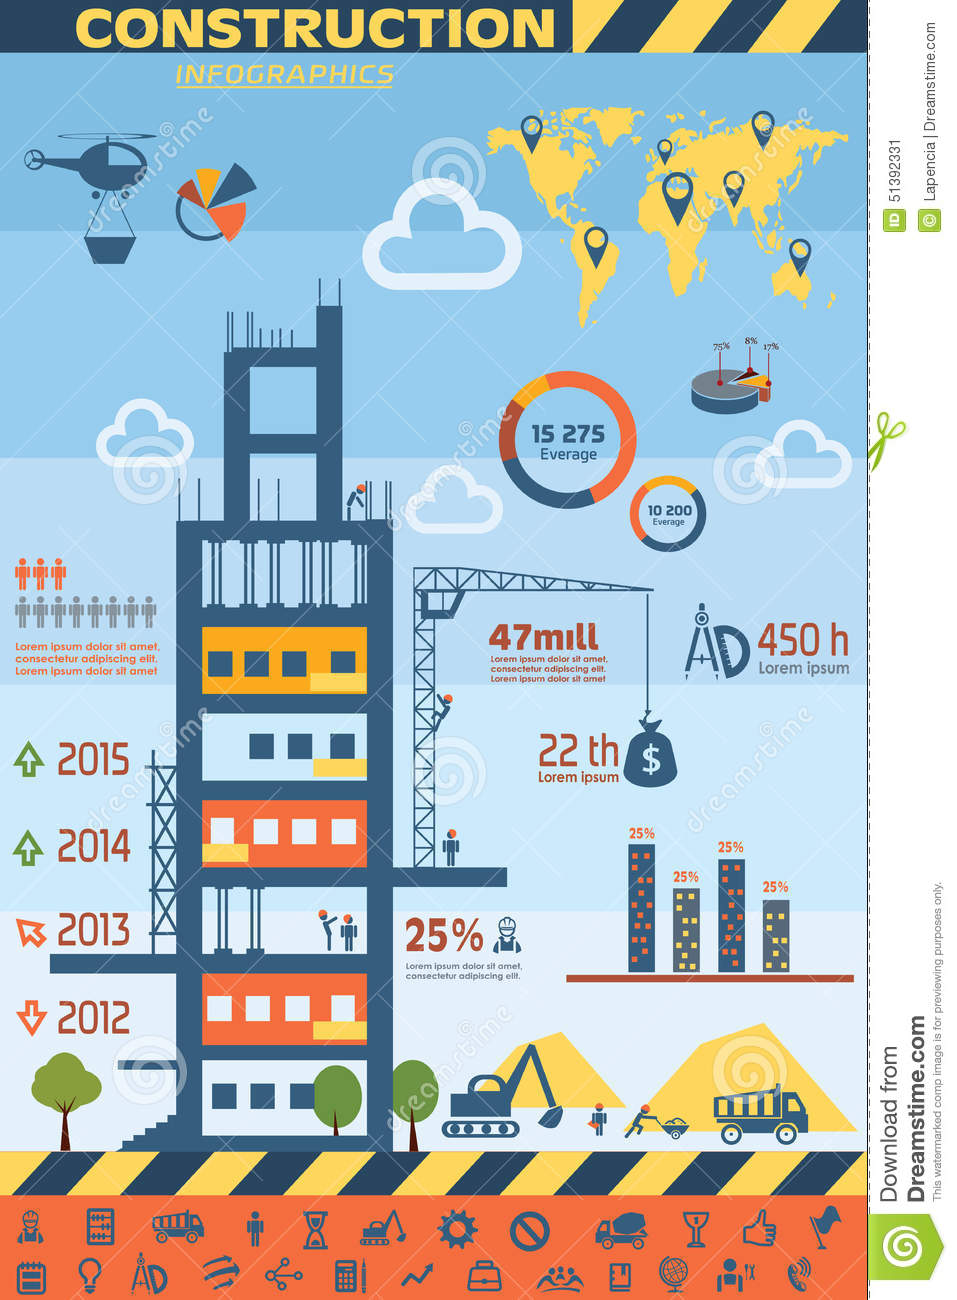 Buildings infographic Vector Image - 1542003 | StockUnlimited